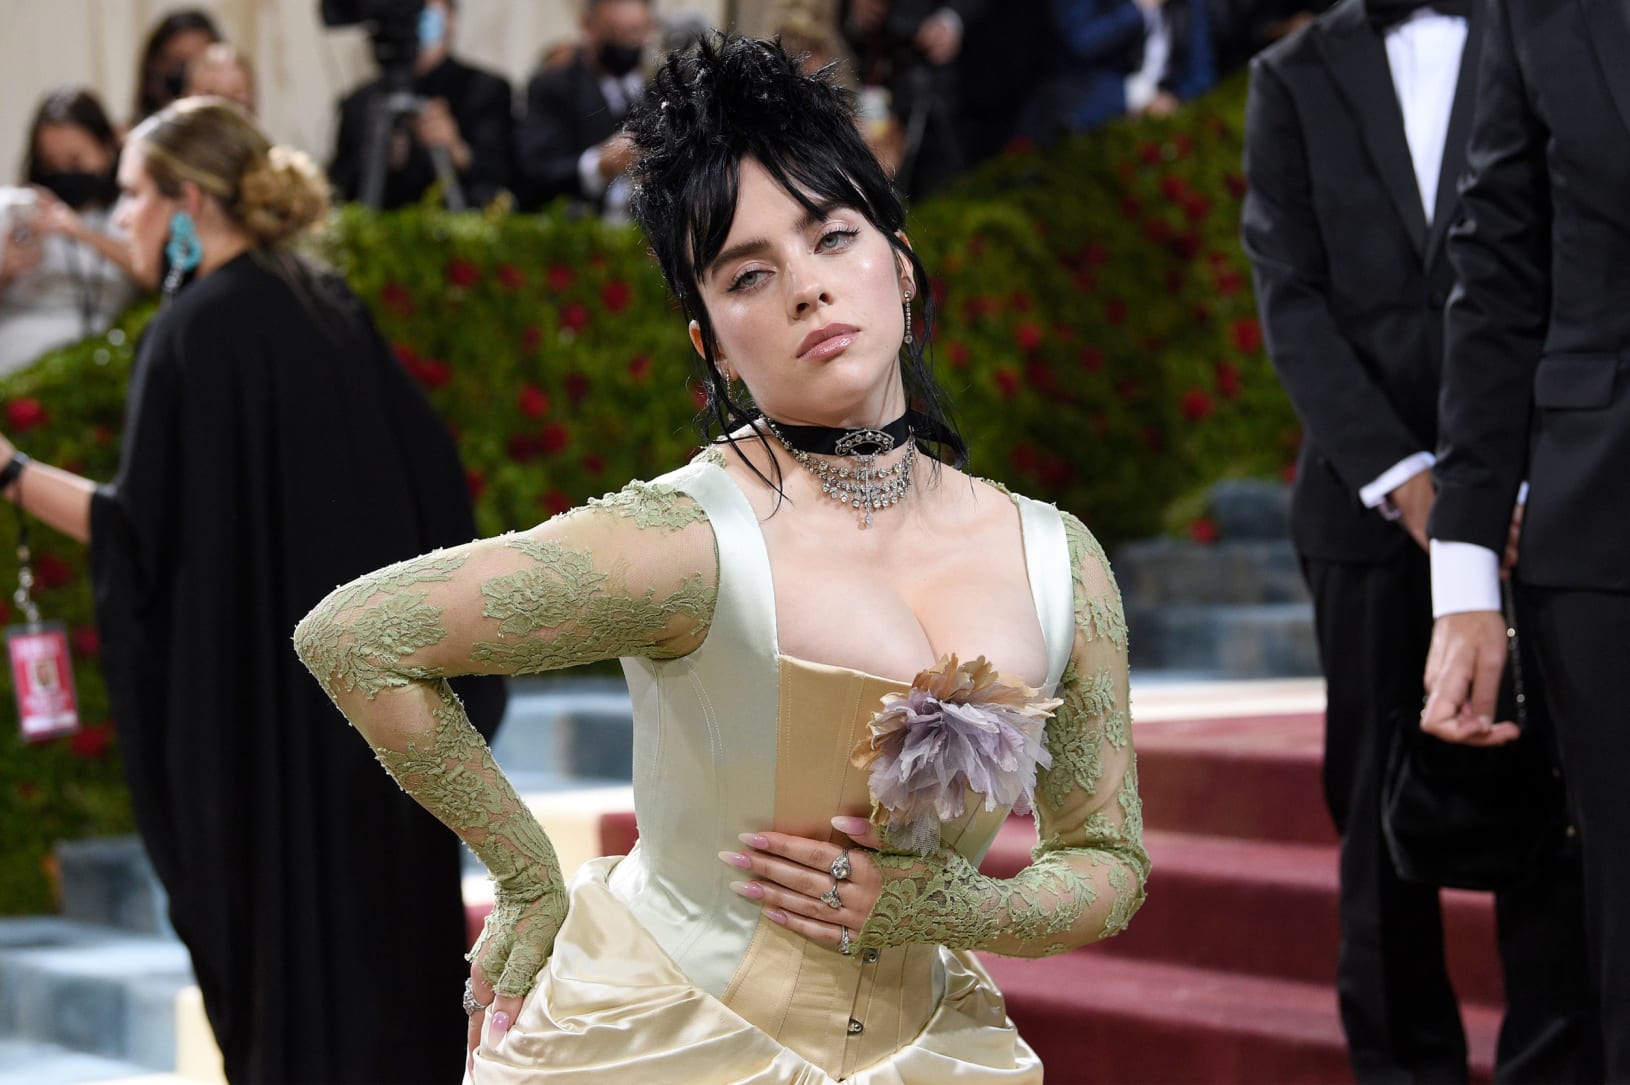 Billie Eilish stunned in an upcycled Gucci dress with a corseted bodice and sheer sea-foam-hued gloved sleeves. Every part of the dress was made from "already existing materials" she said, nodding to its eco-friendly design.